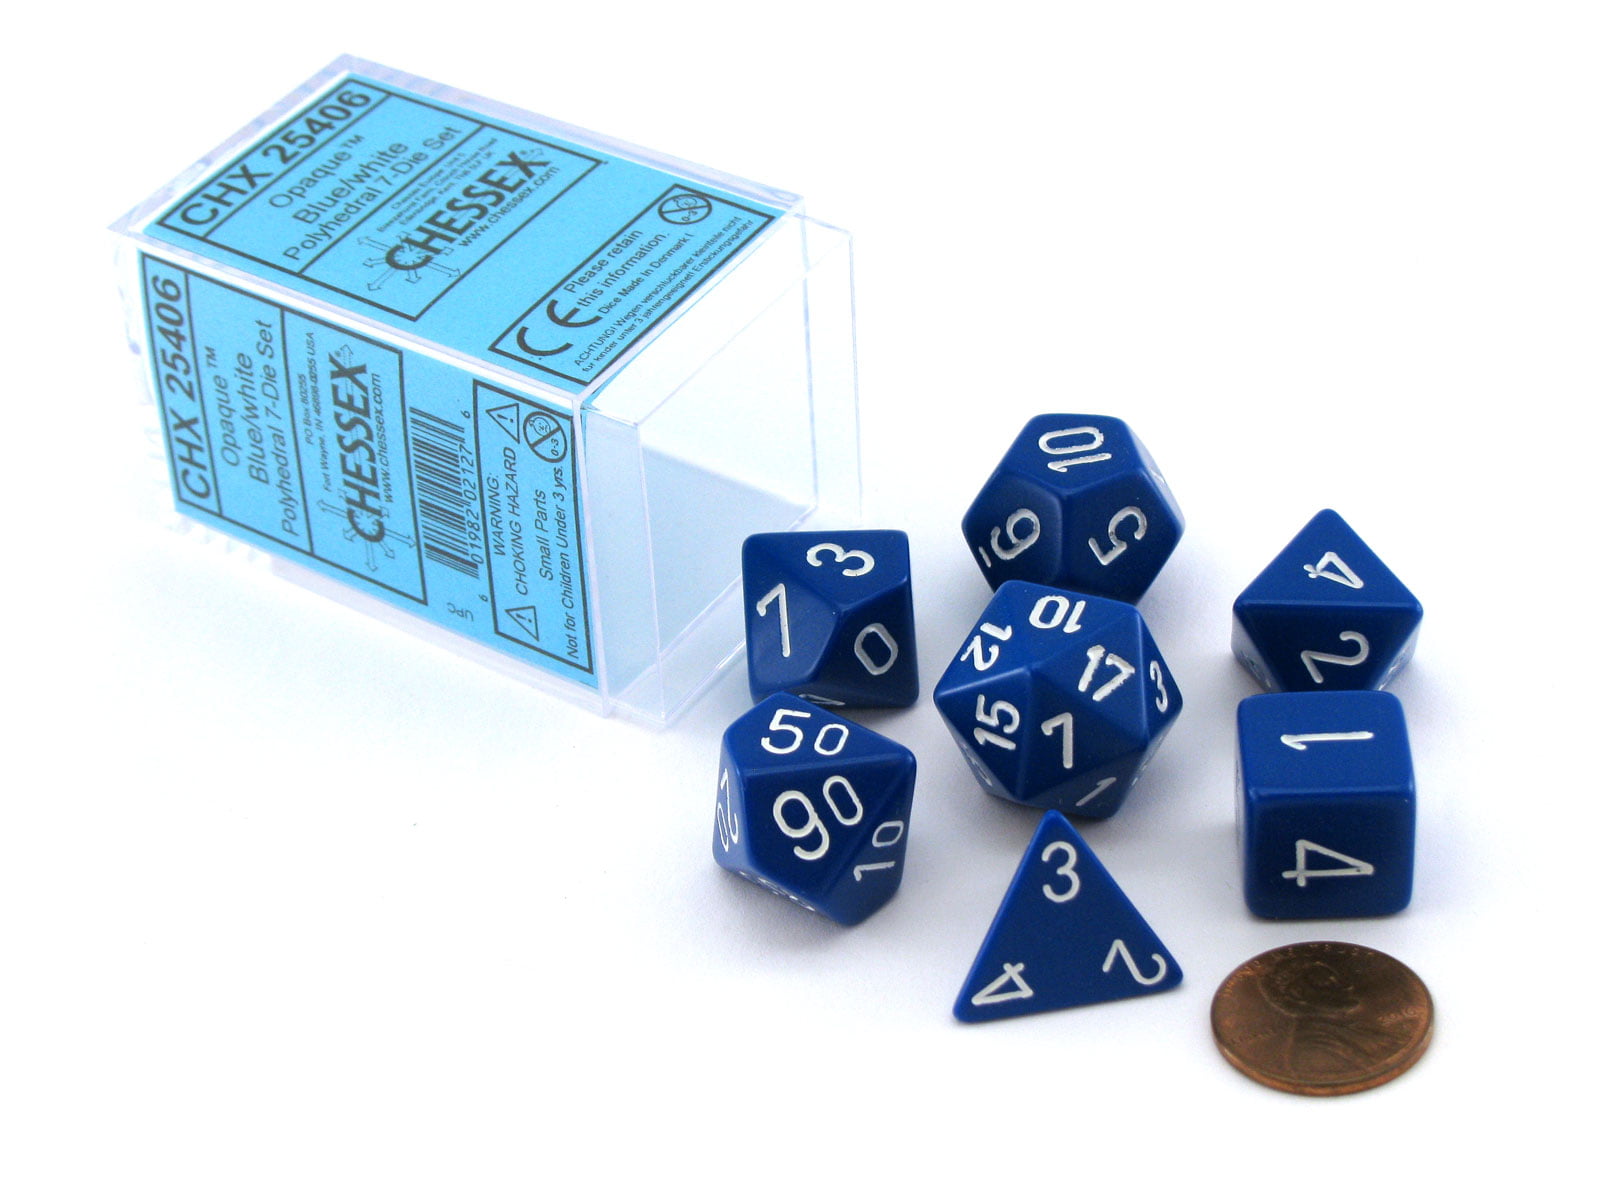 Chessex 7 Die Set Polyhedral Opaque Green With White Poly Dice CHX 25405 RPG for sale online 